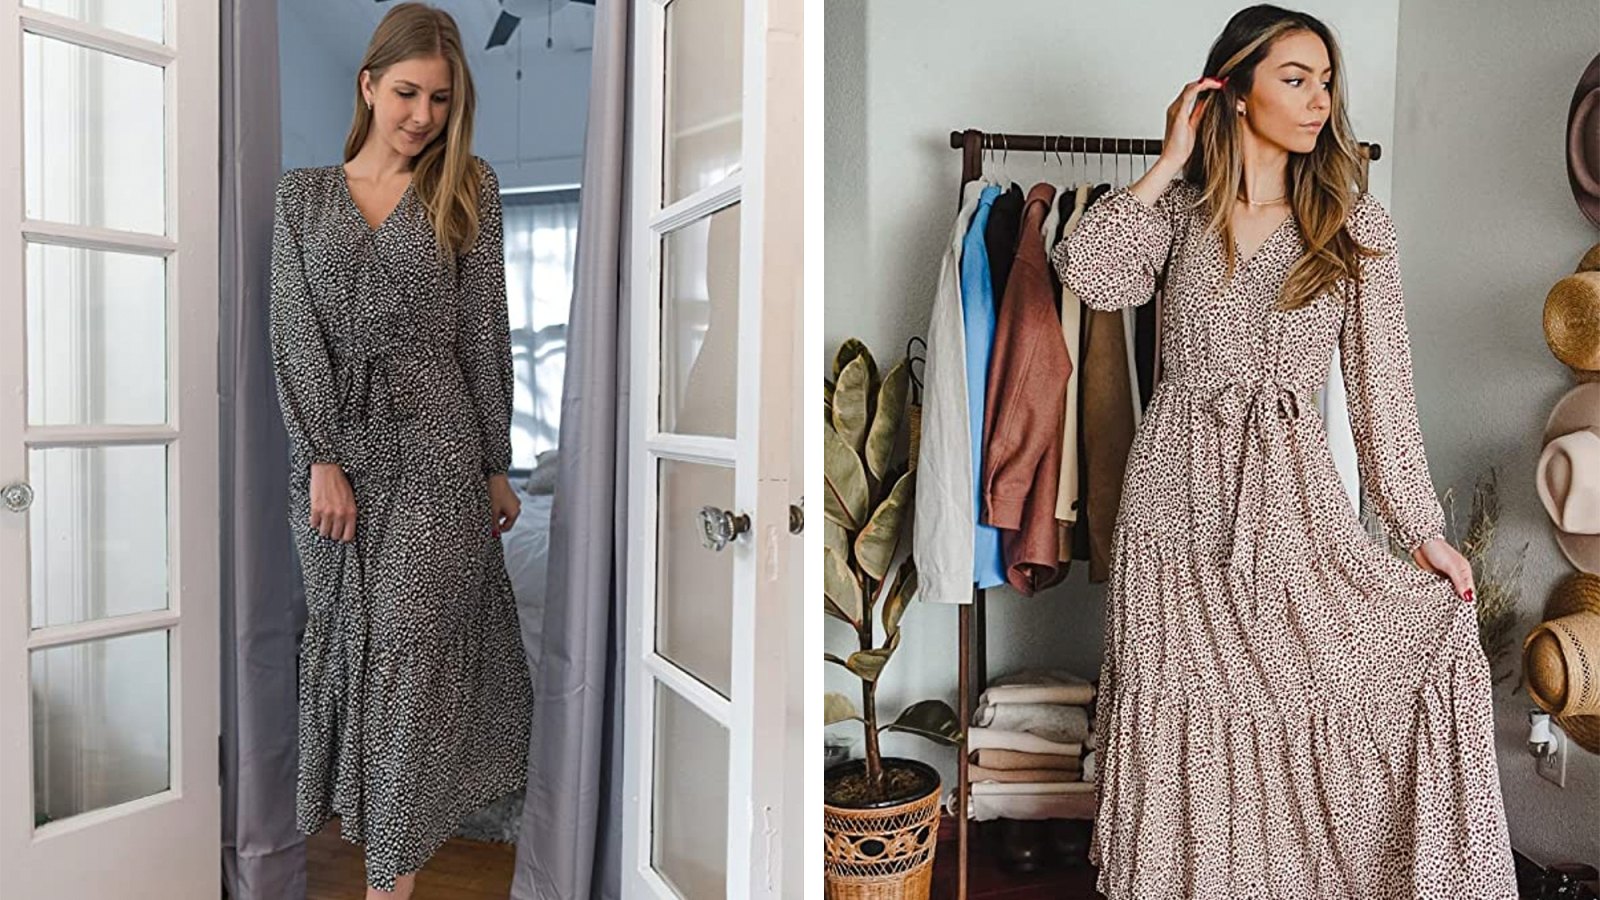 The Cutest Maxi Dress for Spring + The MUST-Have Spring Handbag